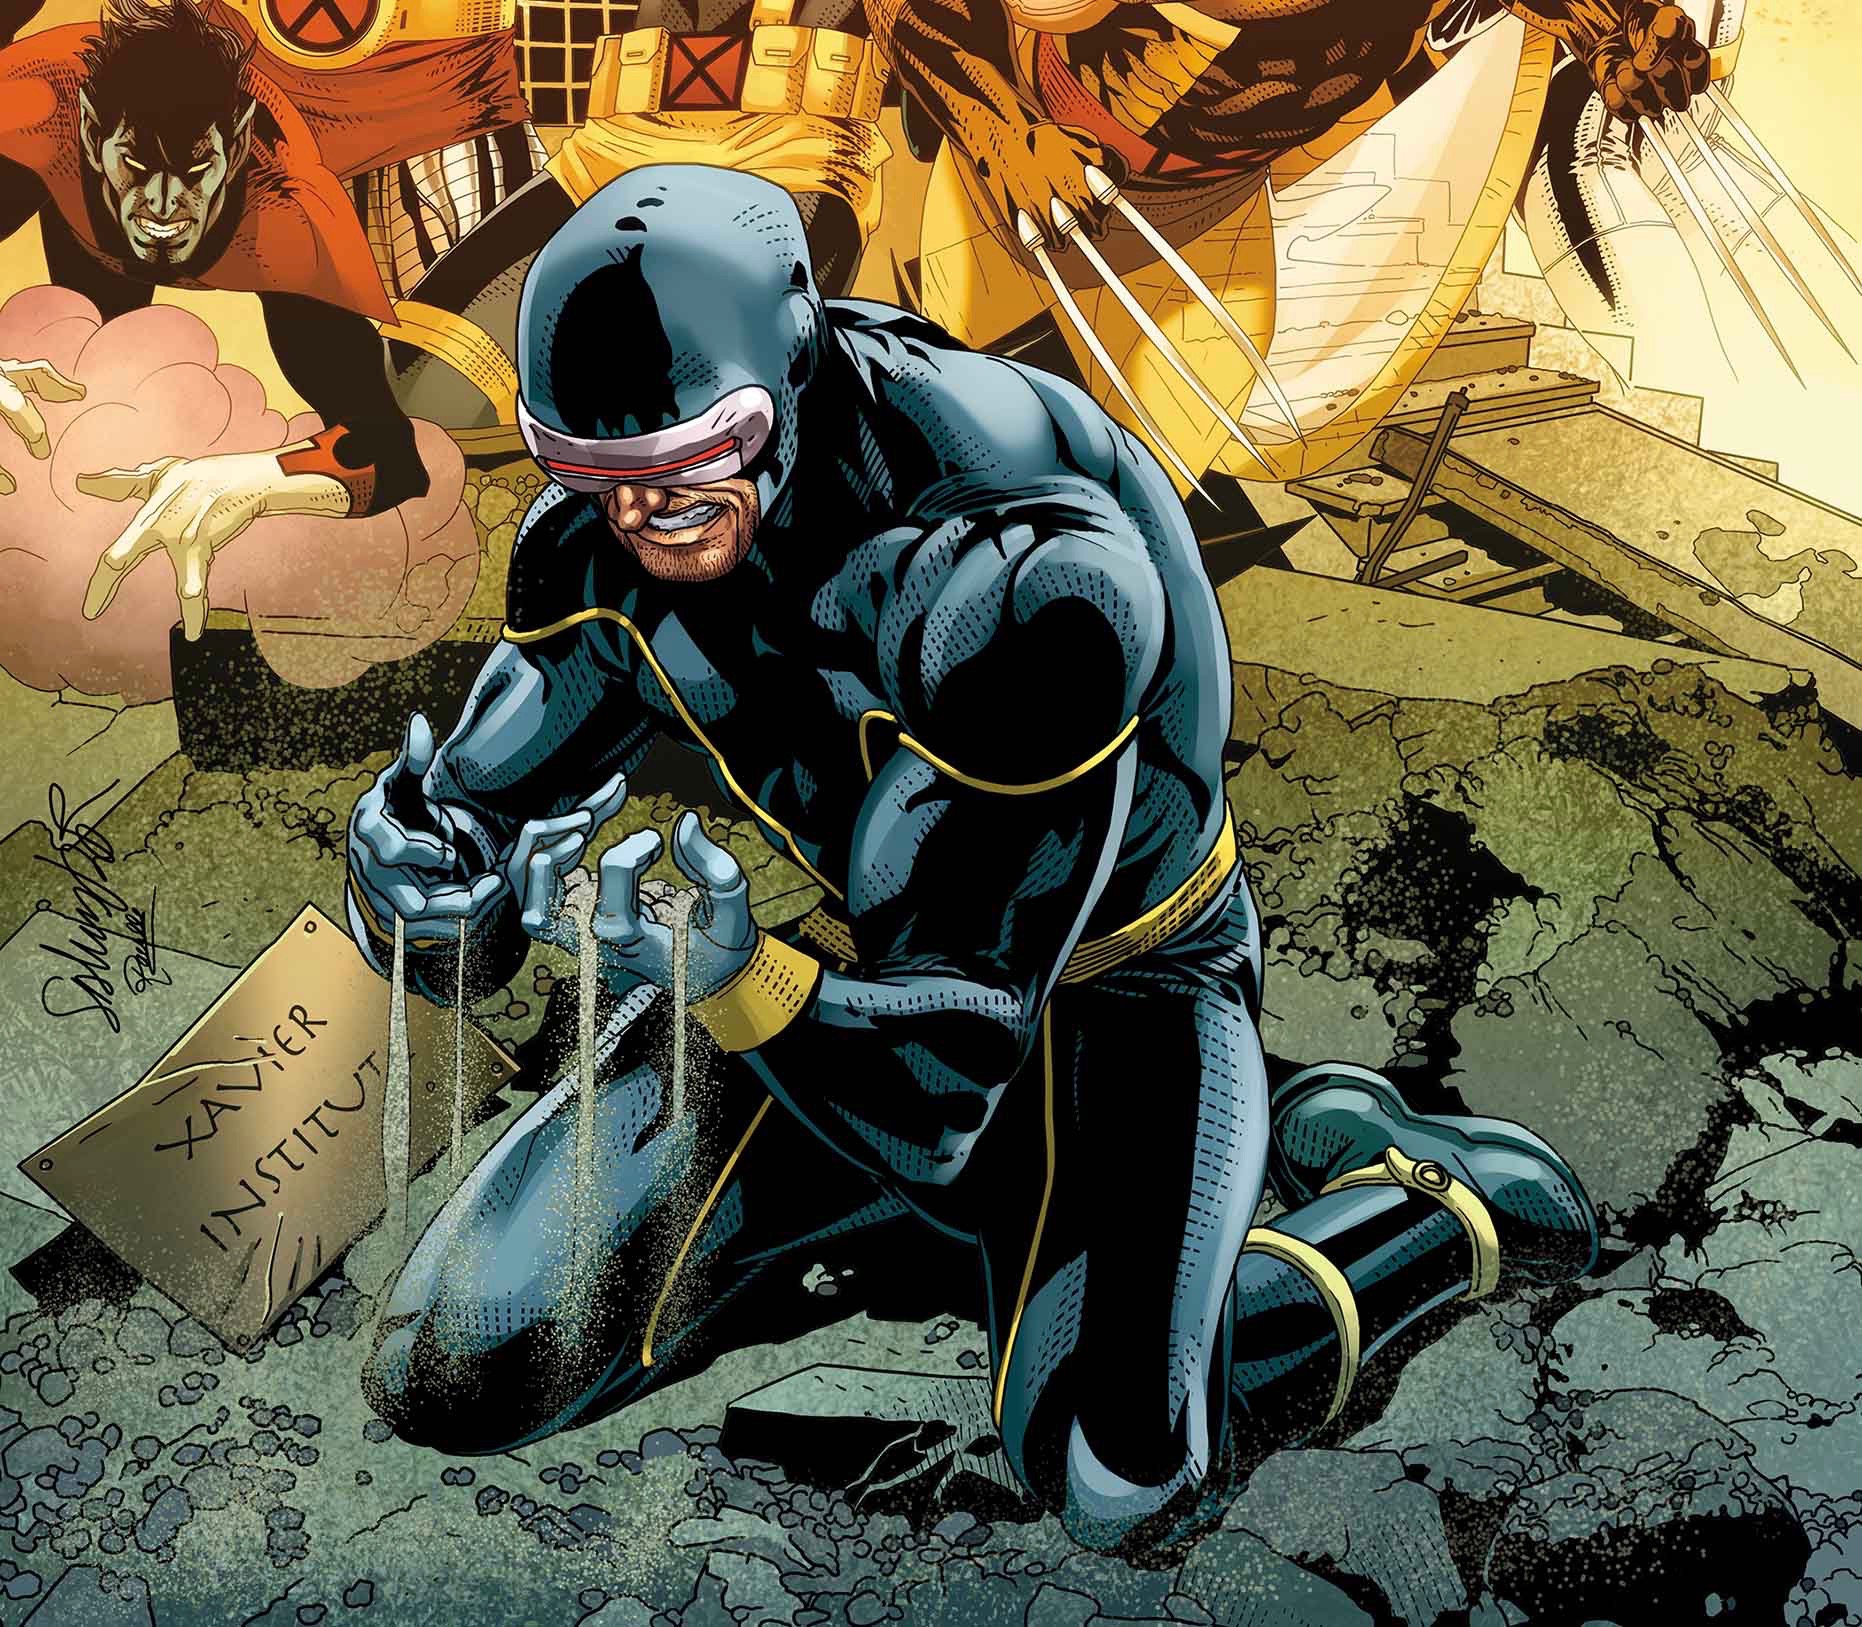 'About redemption and second chances.' Writer Matthew Rosenberg teases Cyclops' return